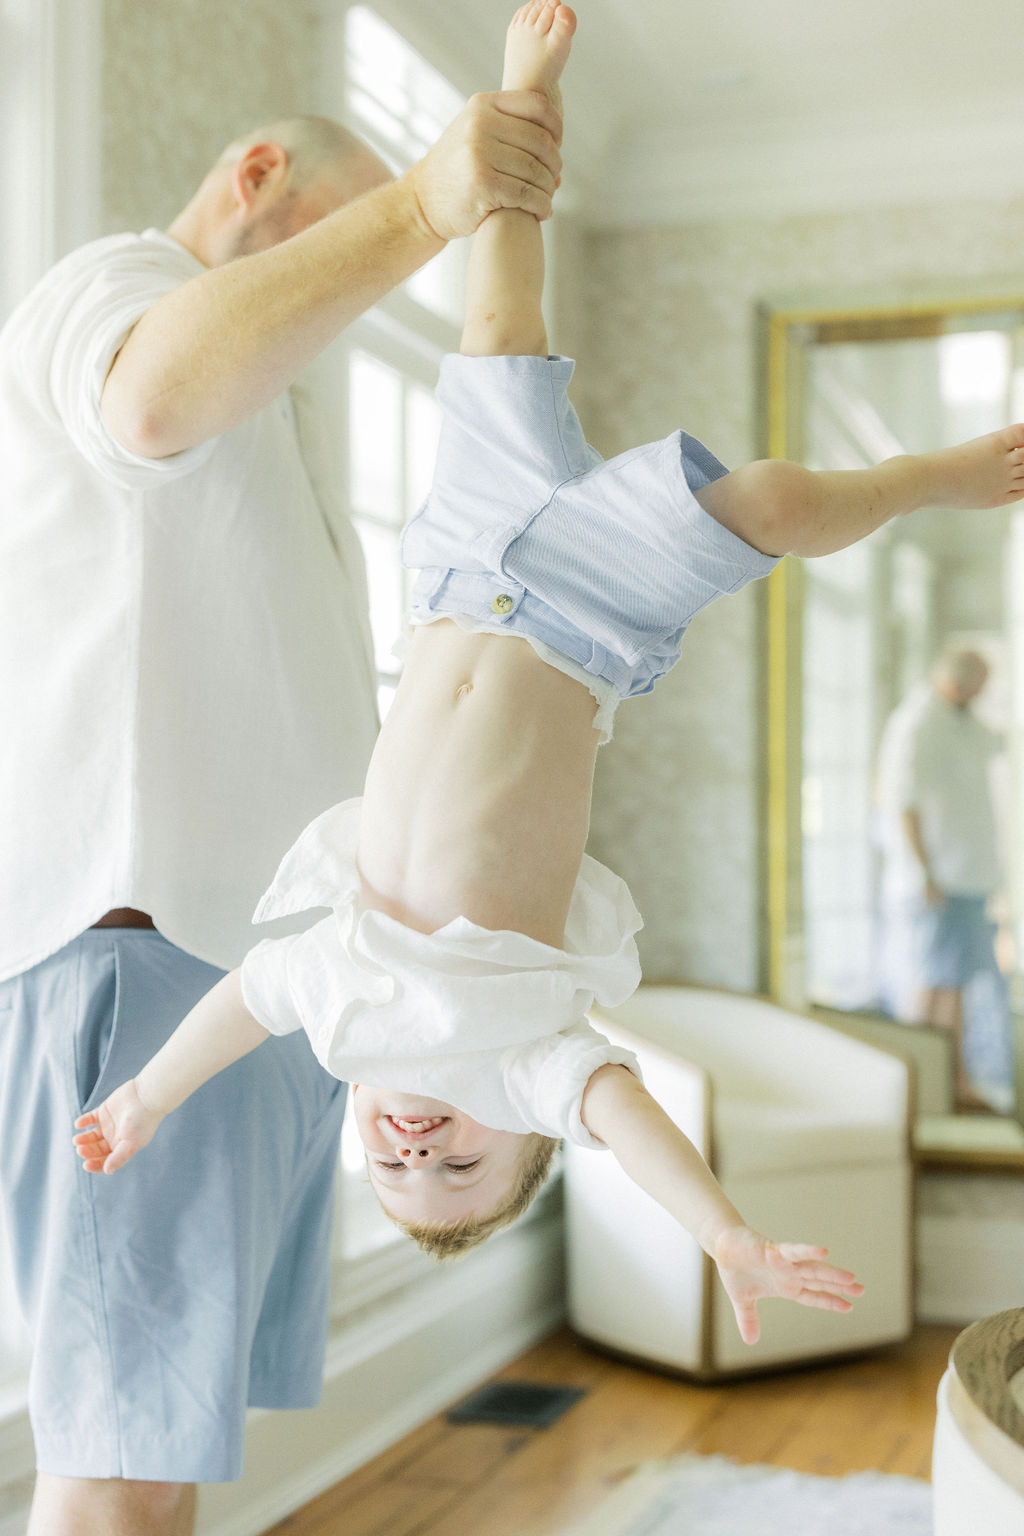 A father dangles his toddler son by the ankle while playing inside before visiting the nest chiropractic